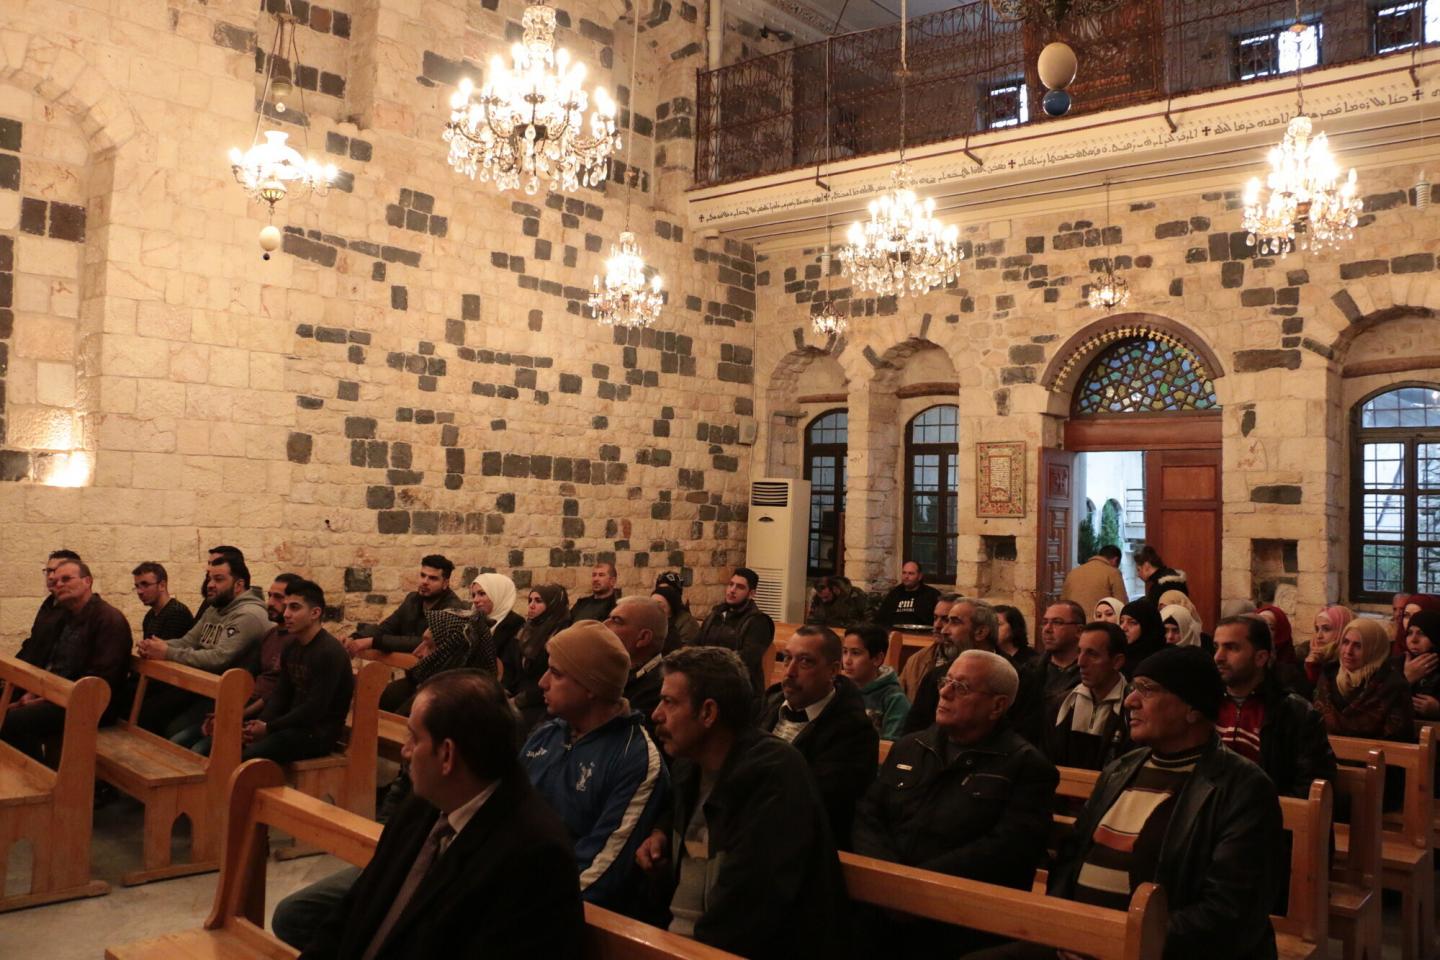 People sitting in stone church sanctuary in Syria